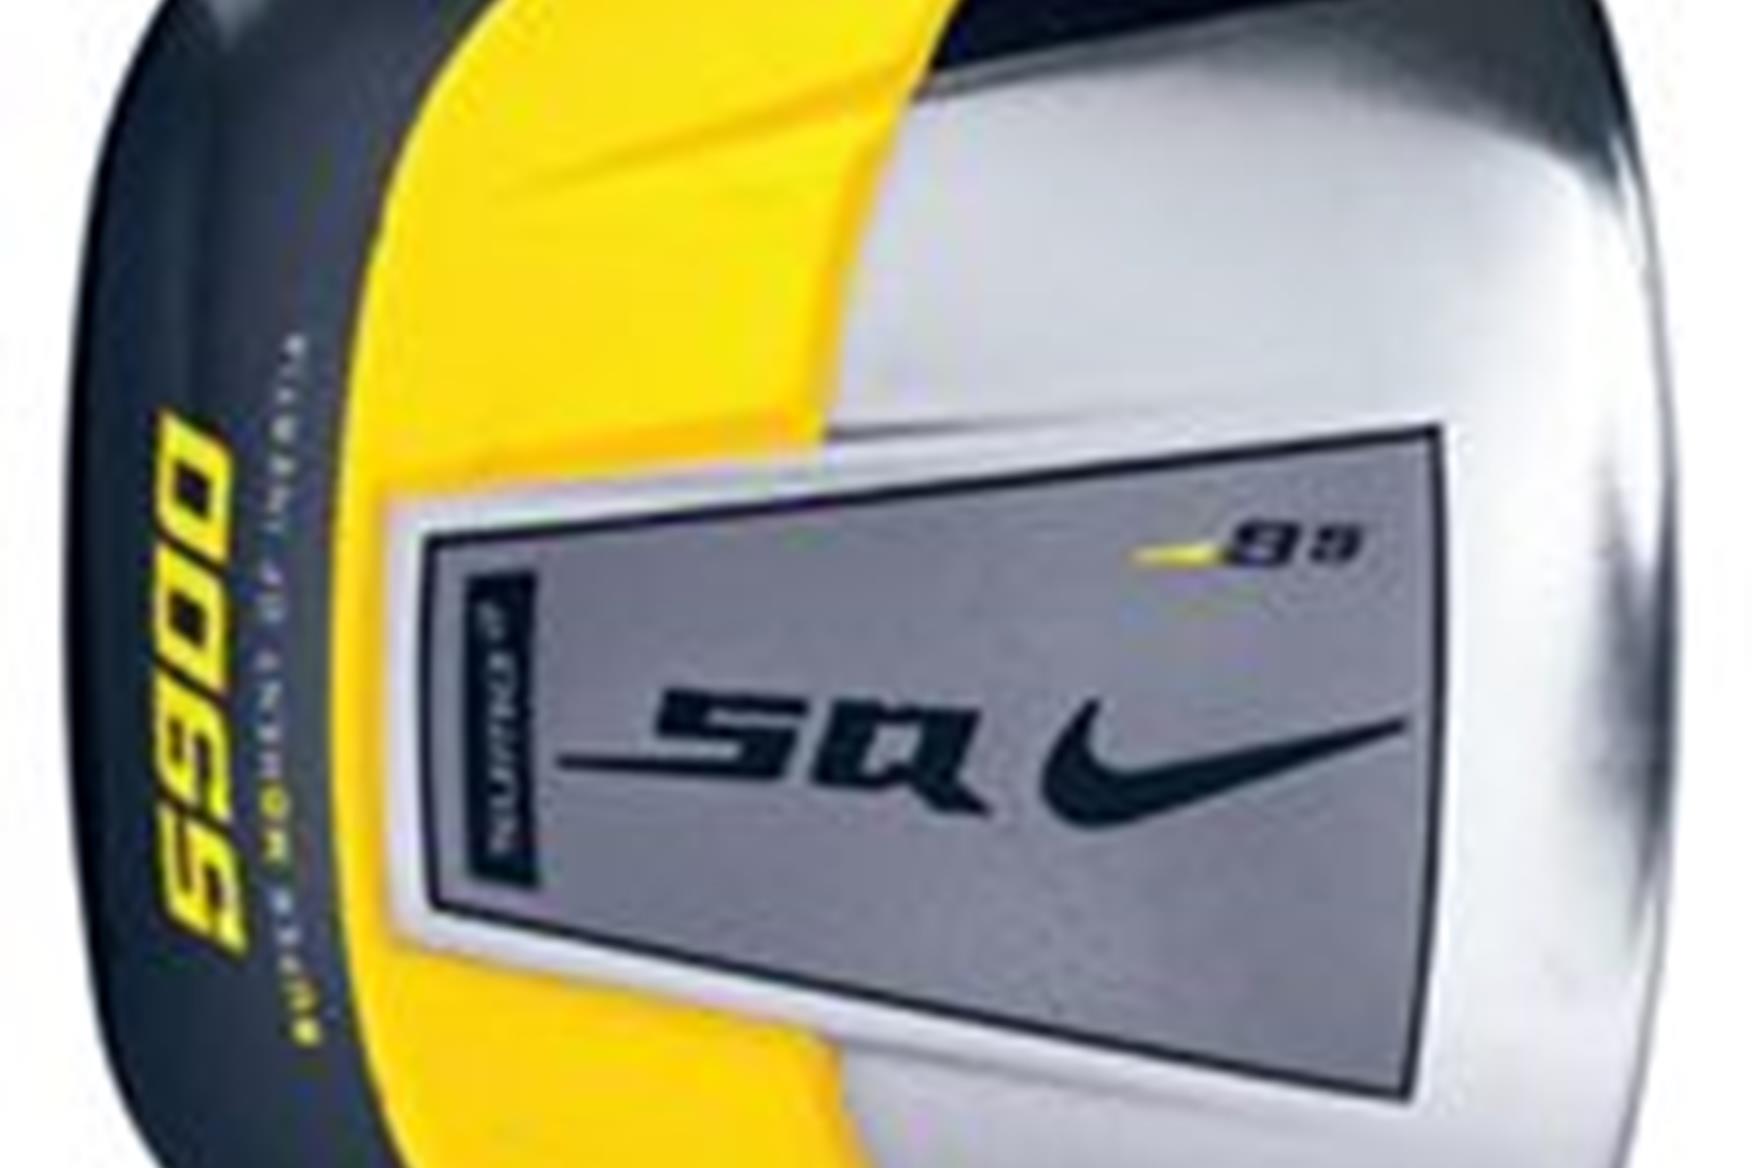 nike sq 460 driver review